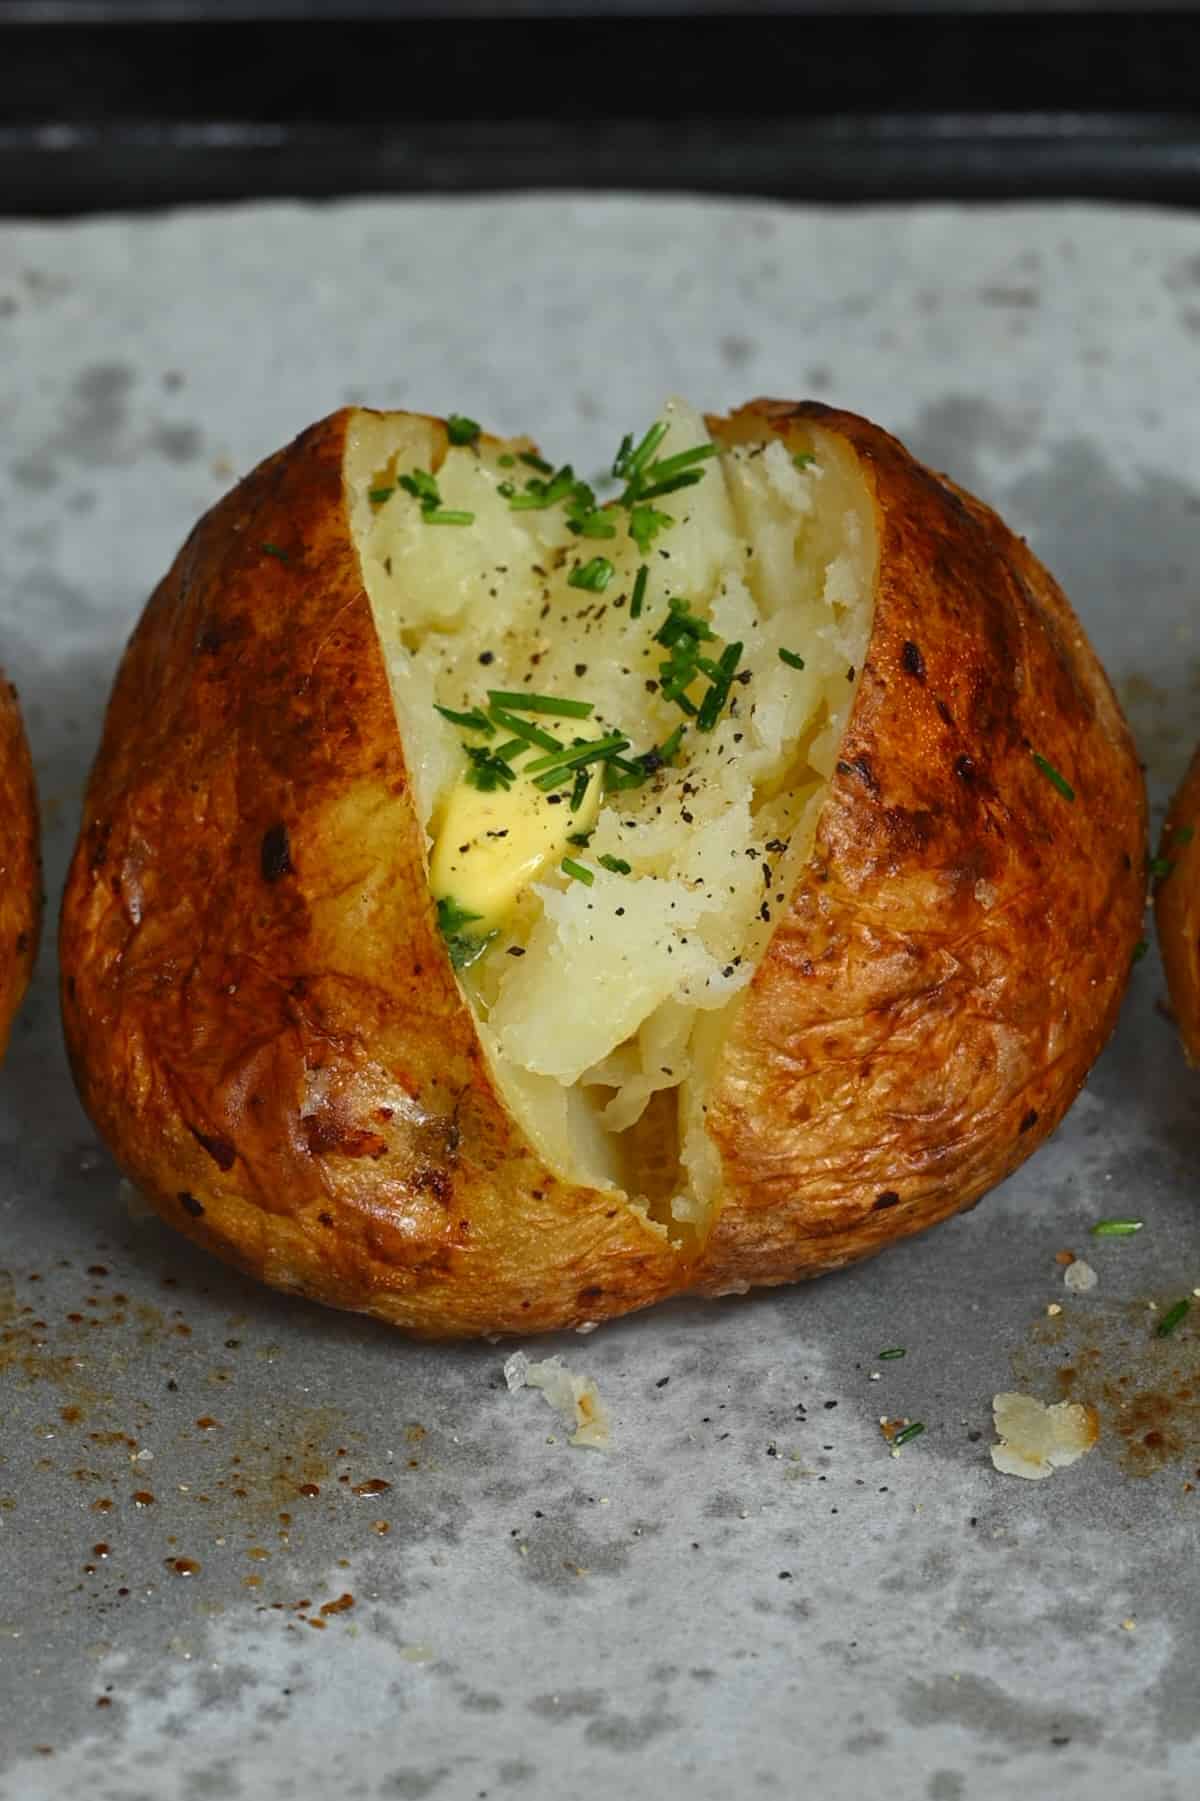 How To Bake A Potato In The Oven - The Best Baked Potato Recipe